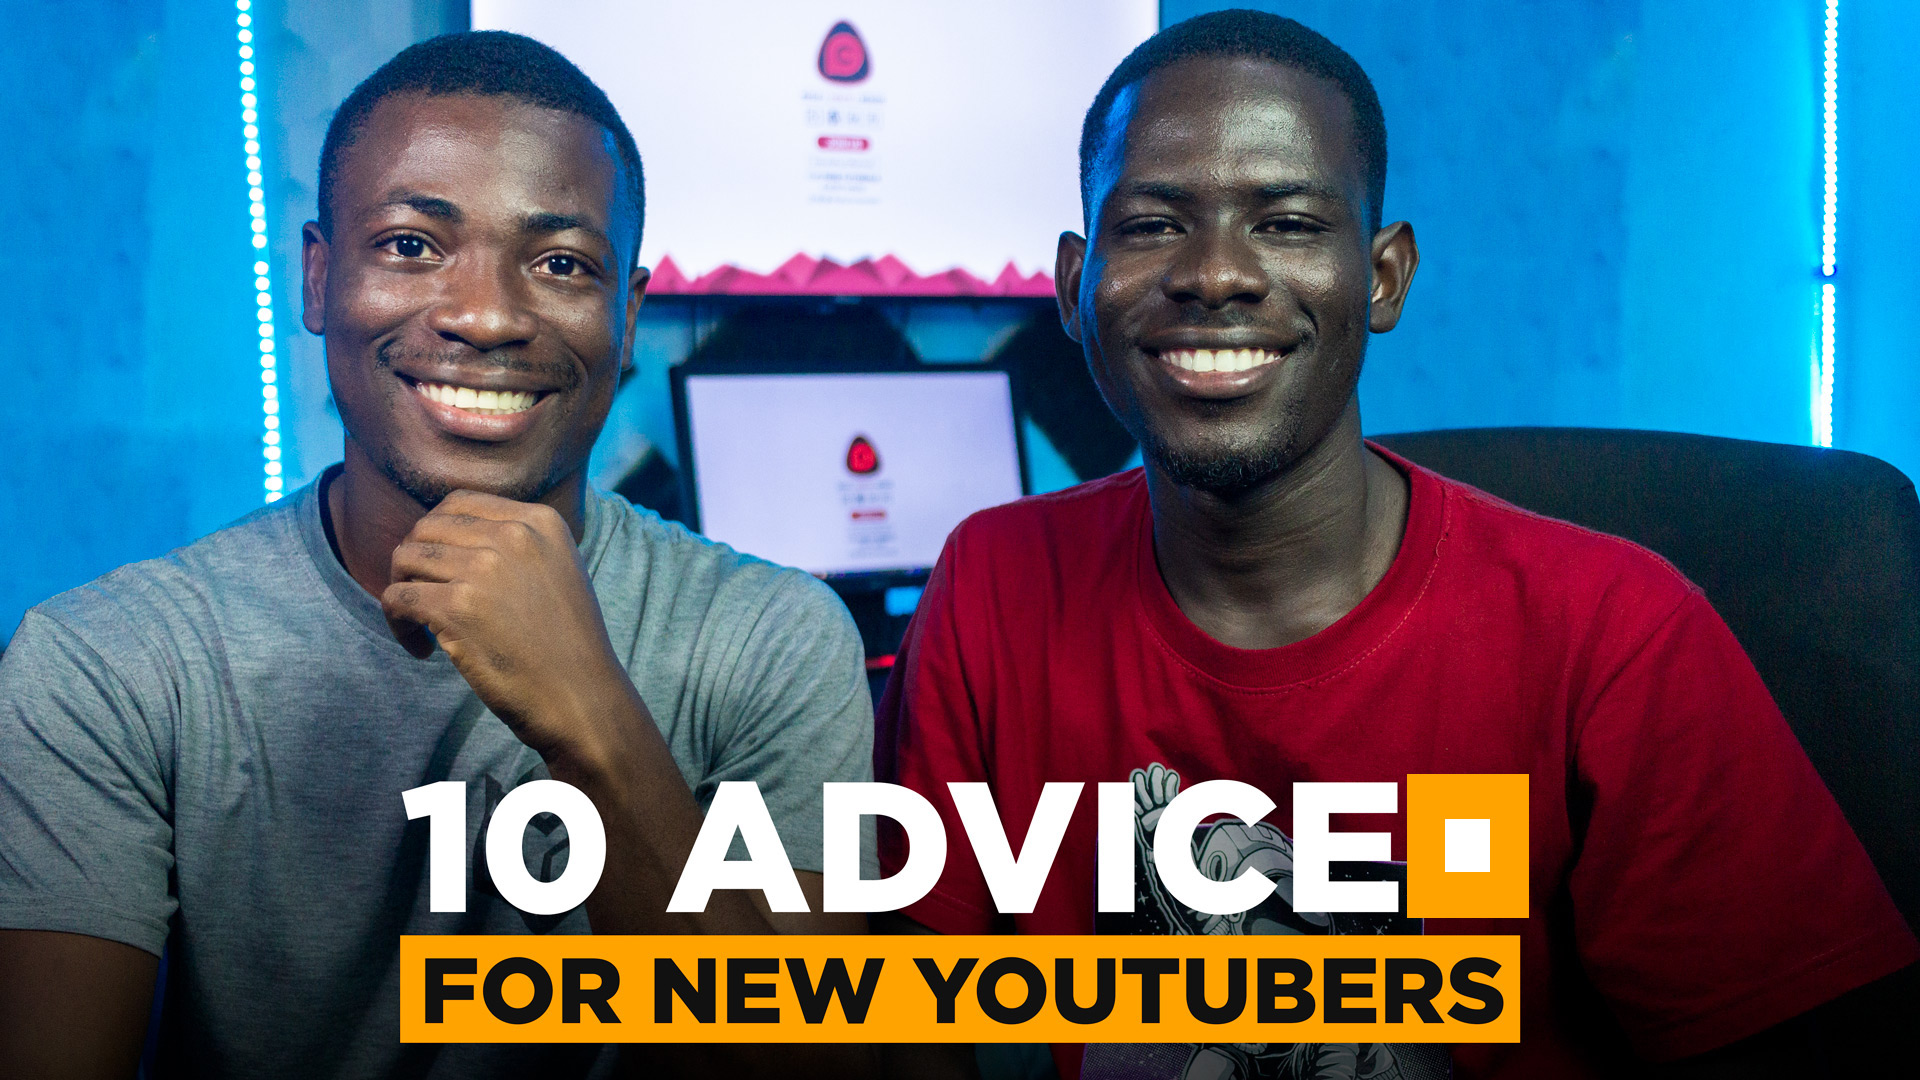 10 ADVICE for new YouTubers, featuring Innocent K Boateng